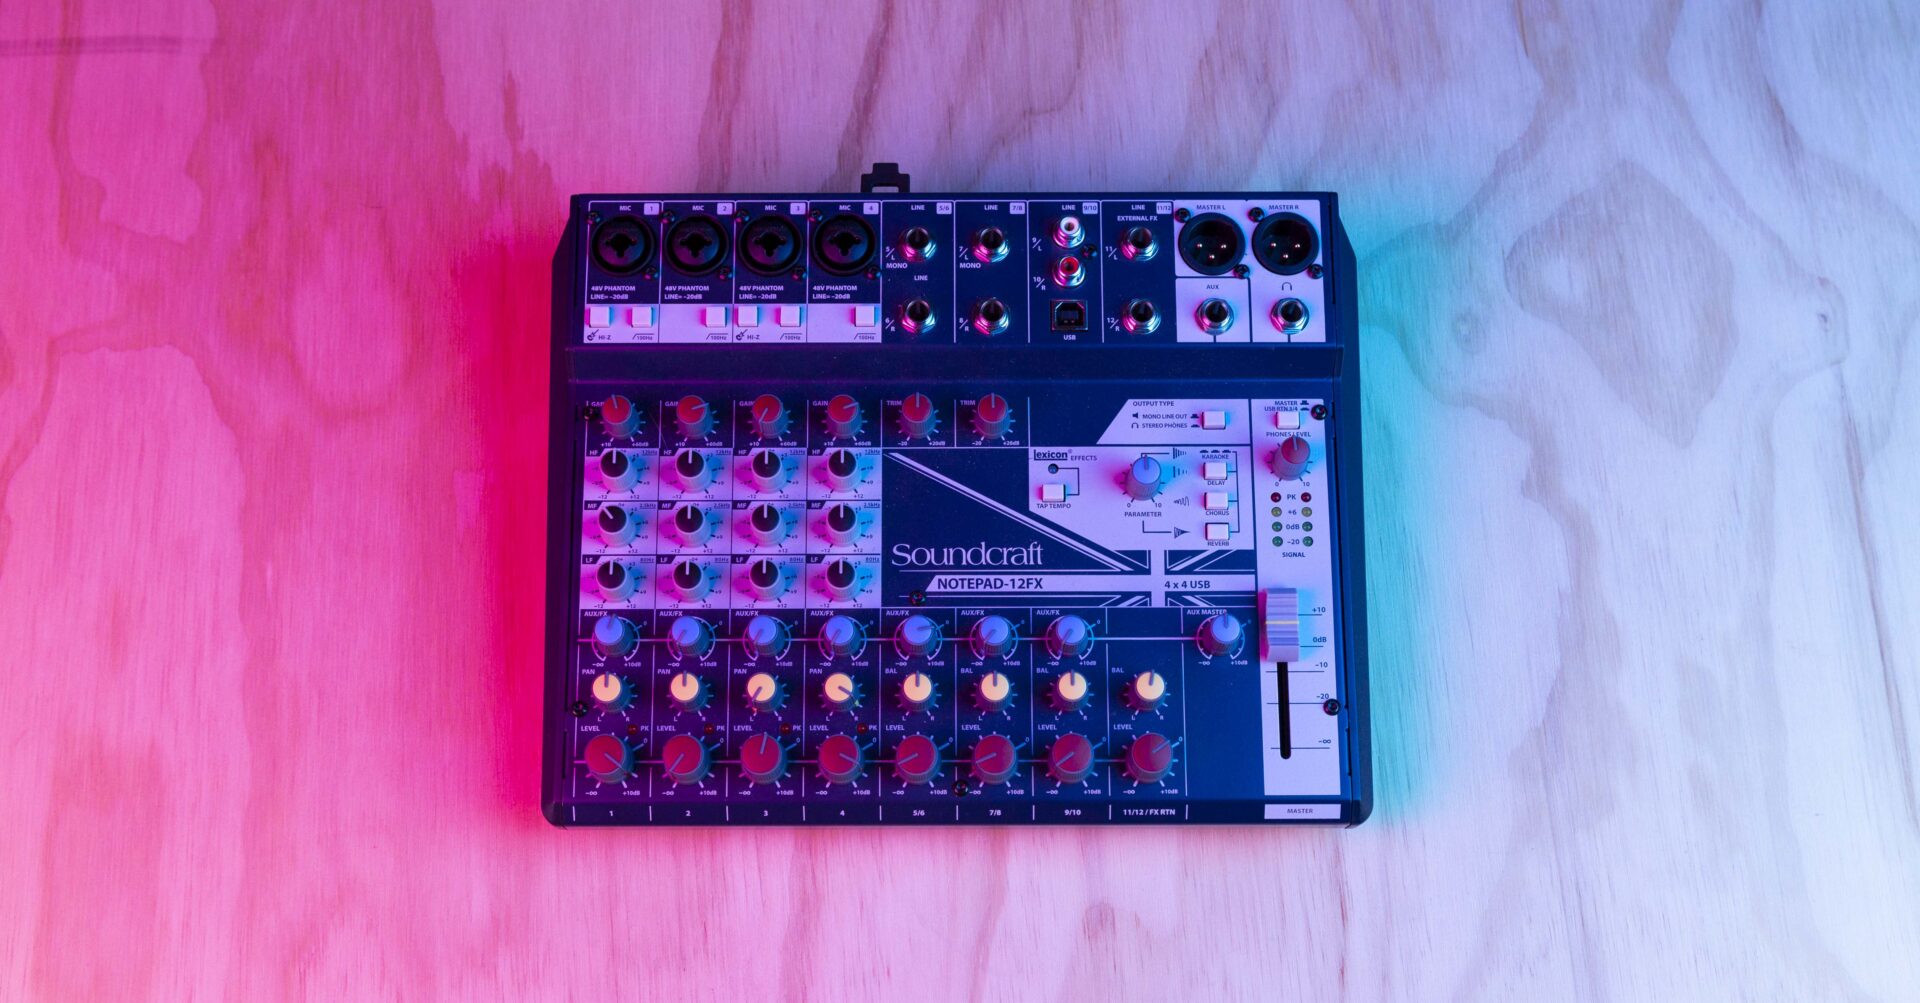 Soundcraft Notepad-12FX Review: Small-format Mixer With USB Audio